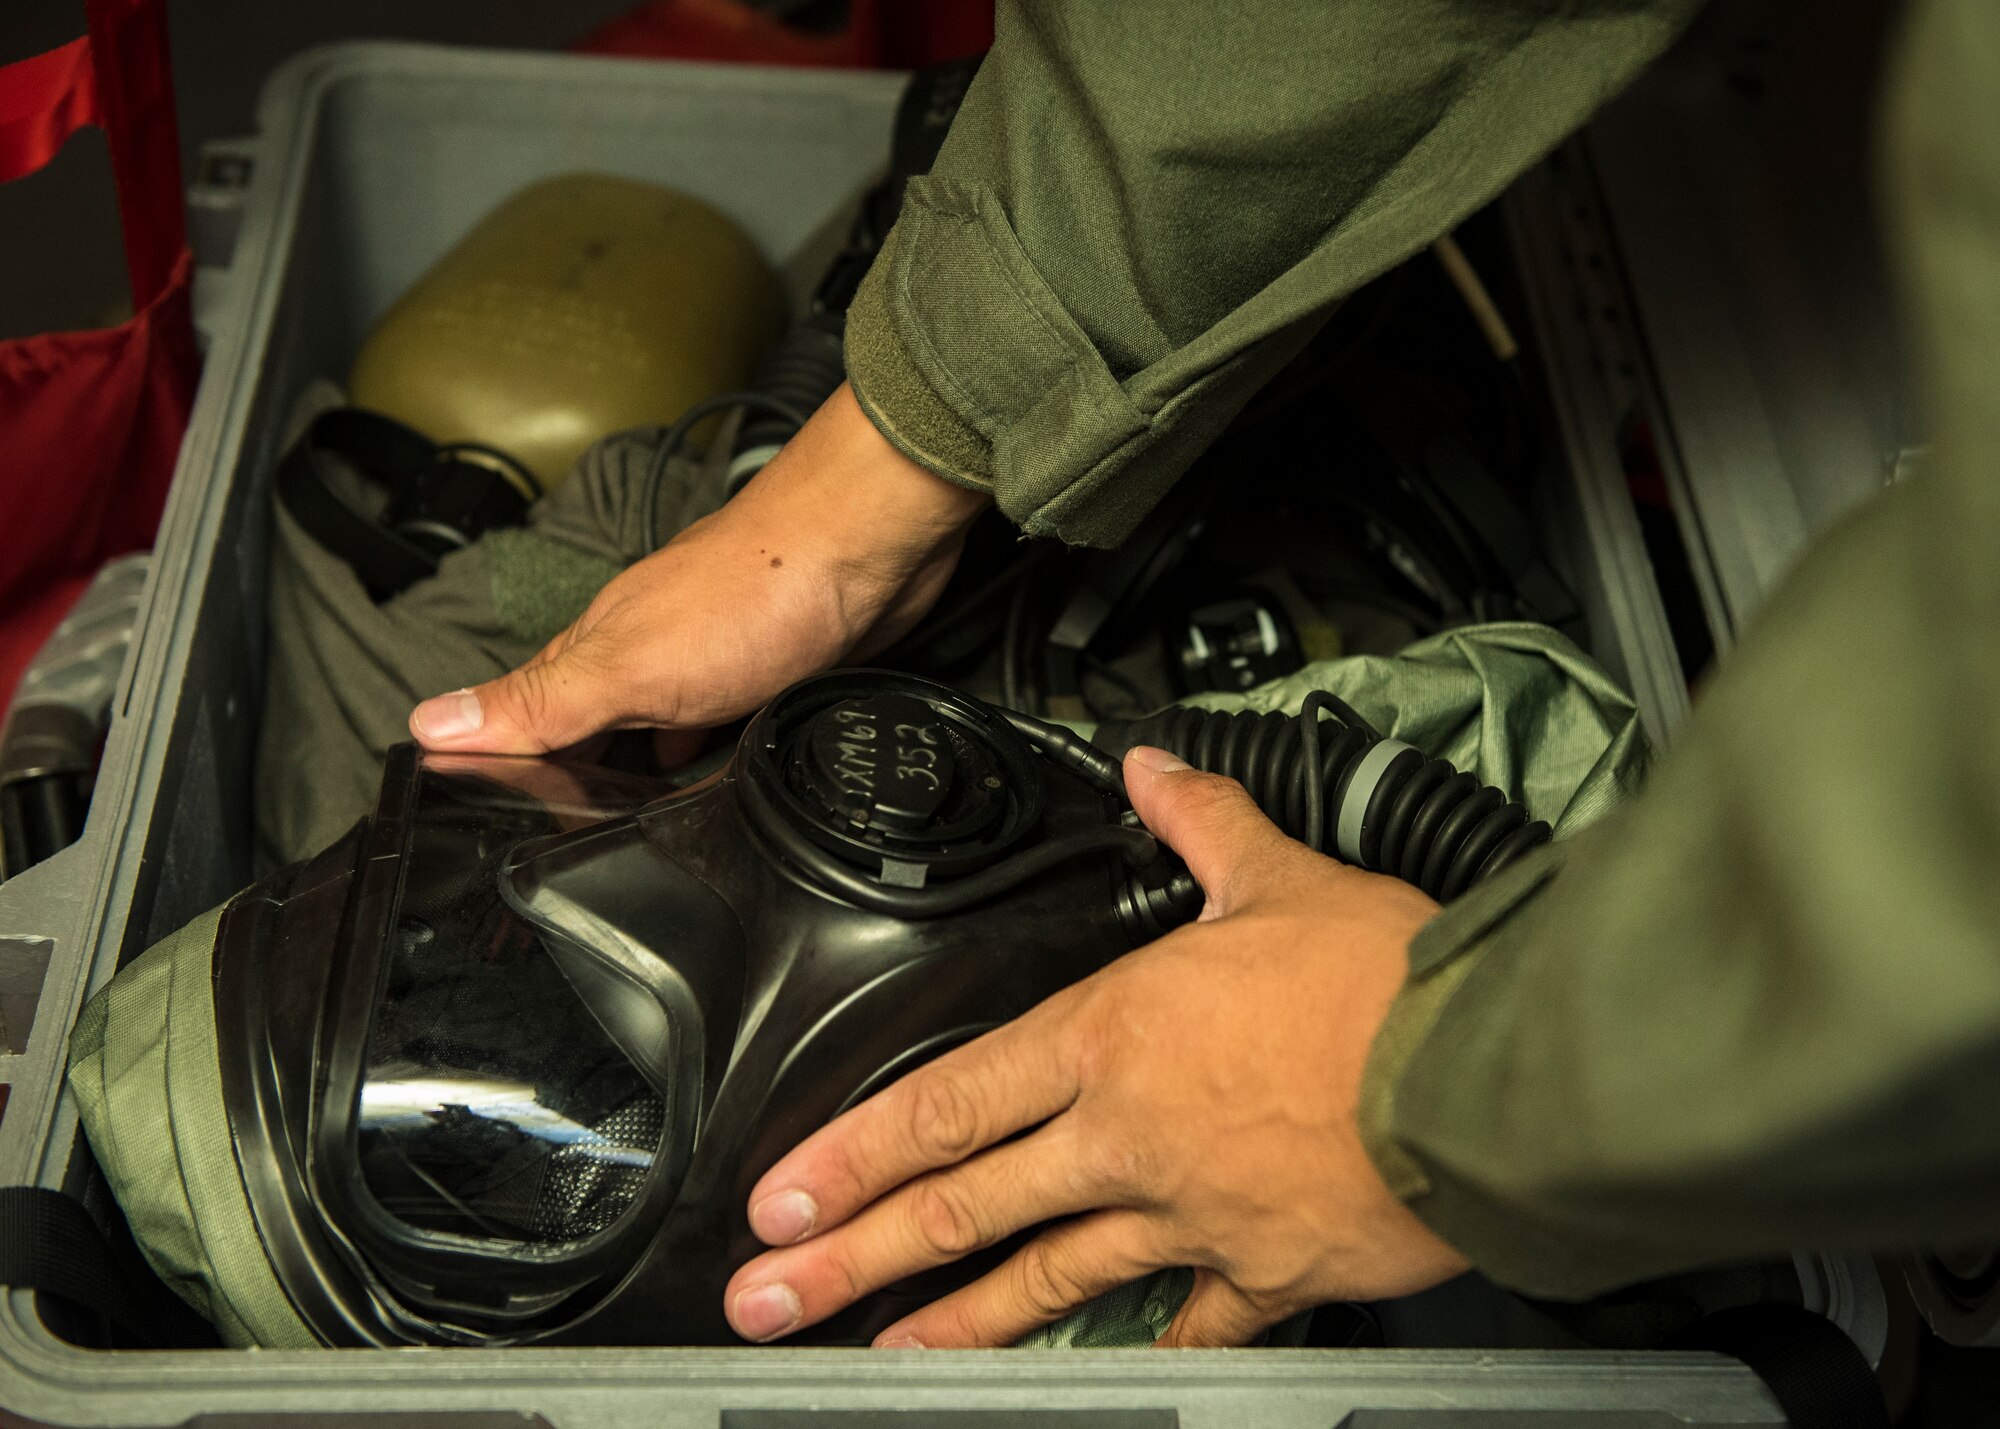 Fairchild aircrew members performed the first in-field use and test of the Joint Service Aircrew Mask on a KC-135 Stratotanker at Fairchild Air Force Base, Washington, July 17, 2018. Equipment undergoing in-field testing represents an initial capability based upon the best available technology, but is not yet the perfect solution. Constantly evolving threat environments demand continual improvements. (U.S. Air Force photo/ Airman 1st Class Whitney Laine)